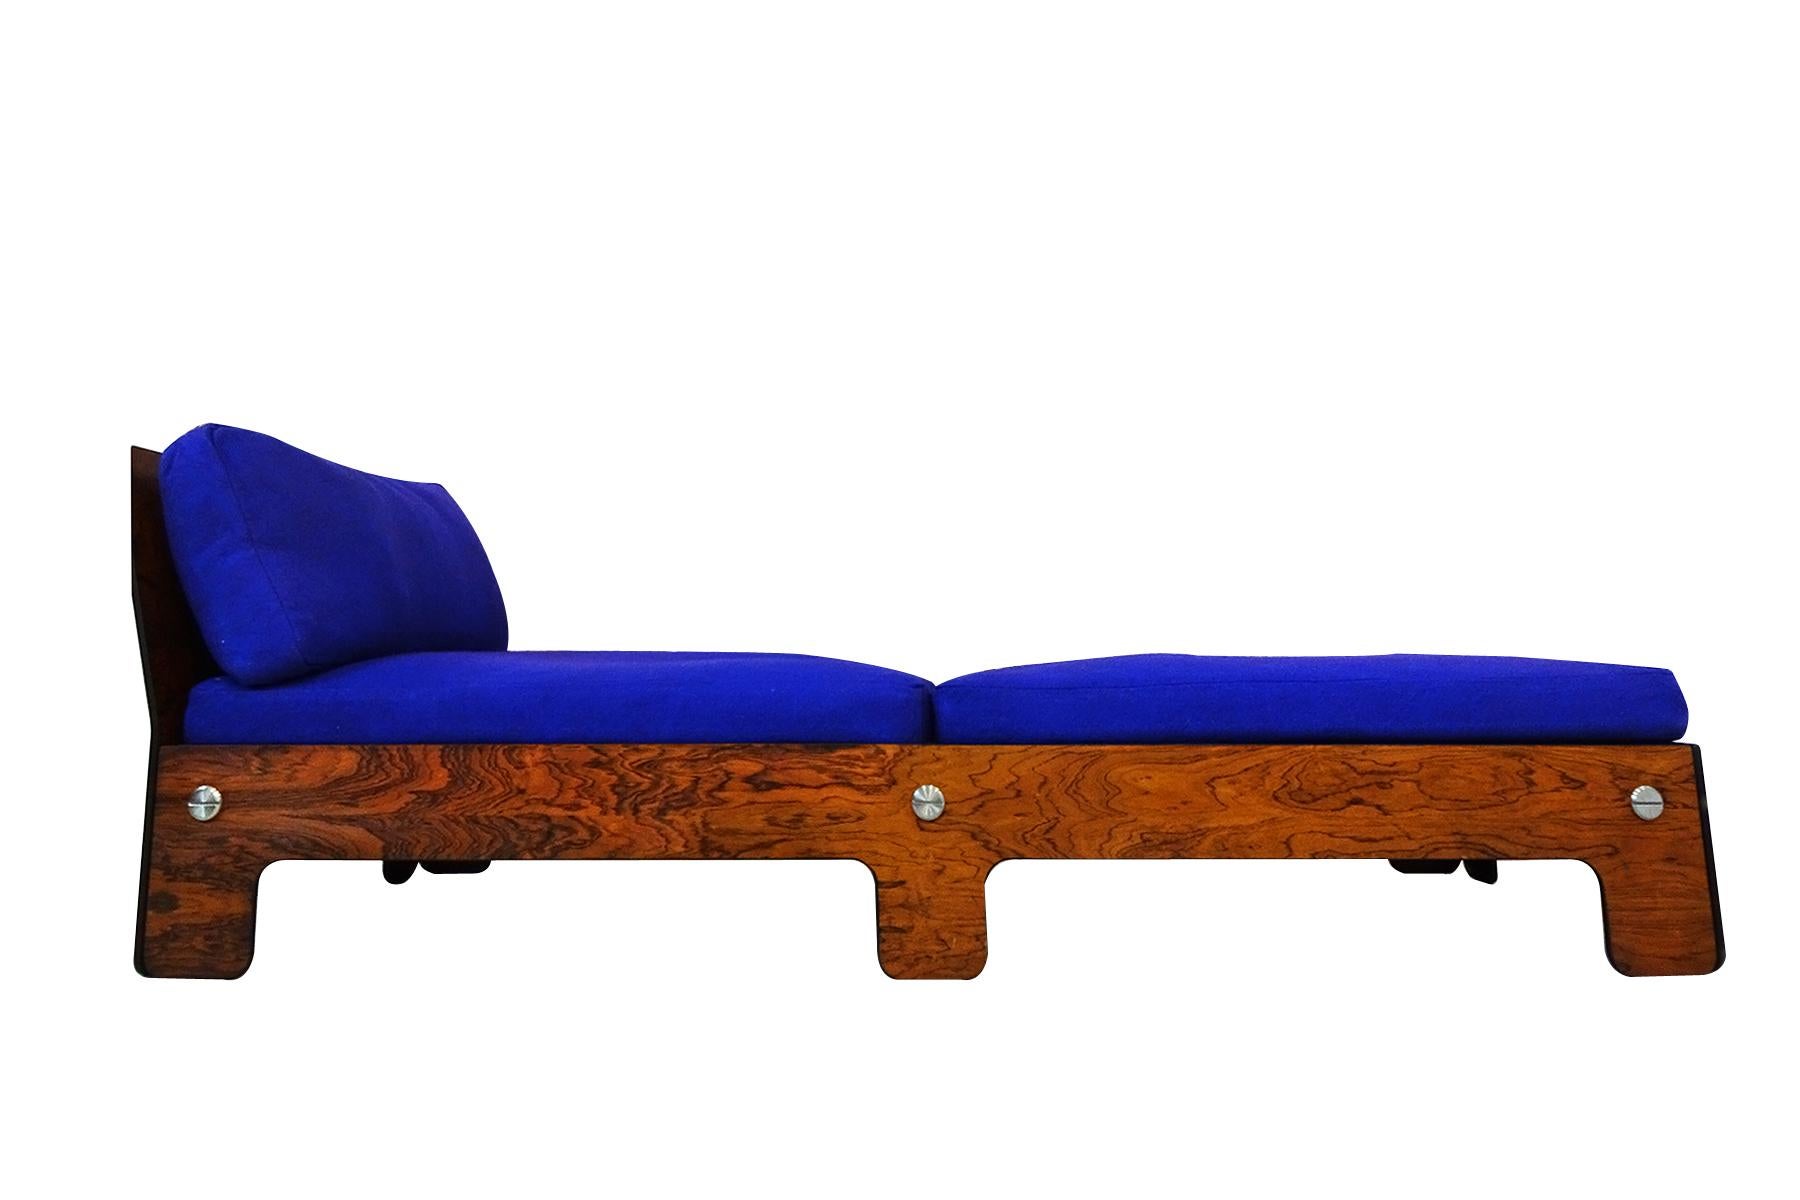 A very rare Midcentury chaise longue or day bed in blue and rosewood.

Very little is known about the designs origins of this beautiful and unusual chaise. The striking design using rosewood veneer complimented by large polished steel screw/bolts